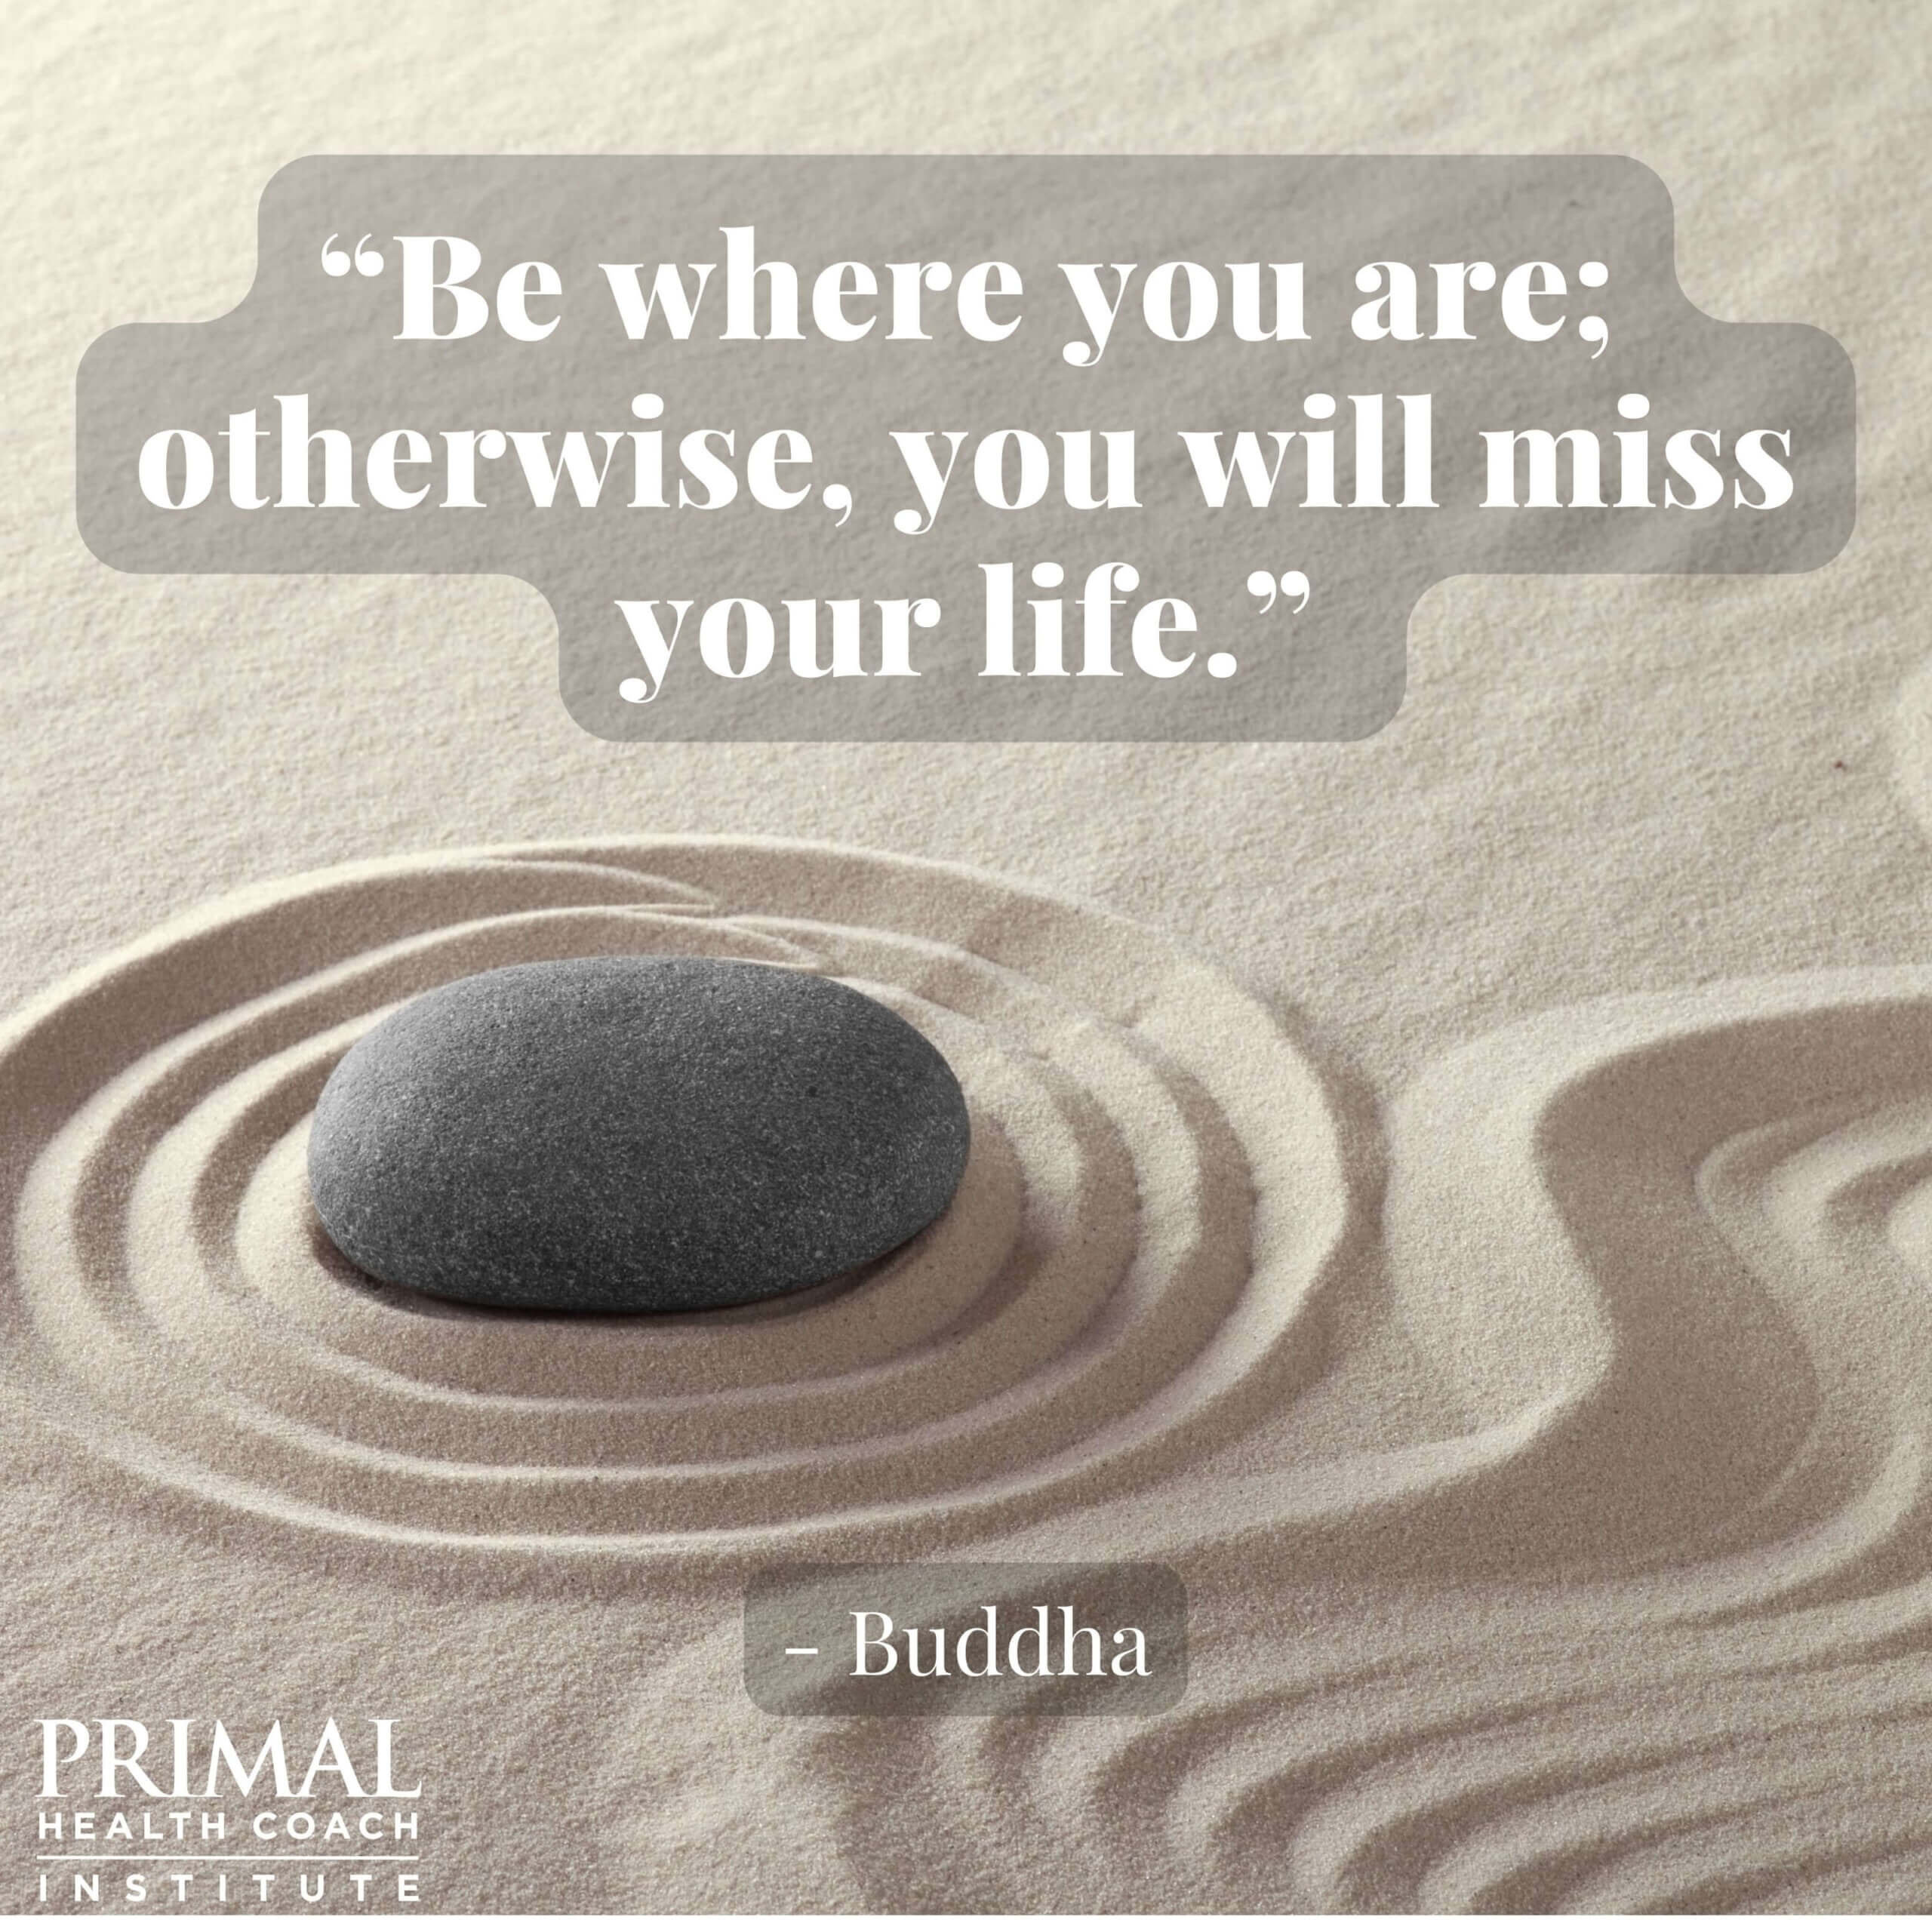 “Be where you are; otherwise, you will miss your life.” - Buddha